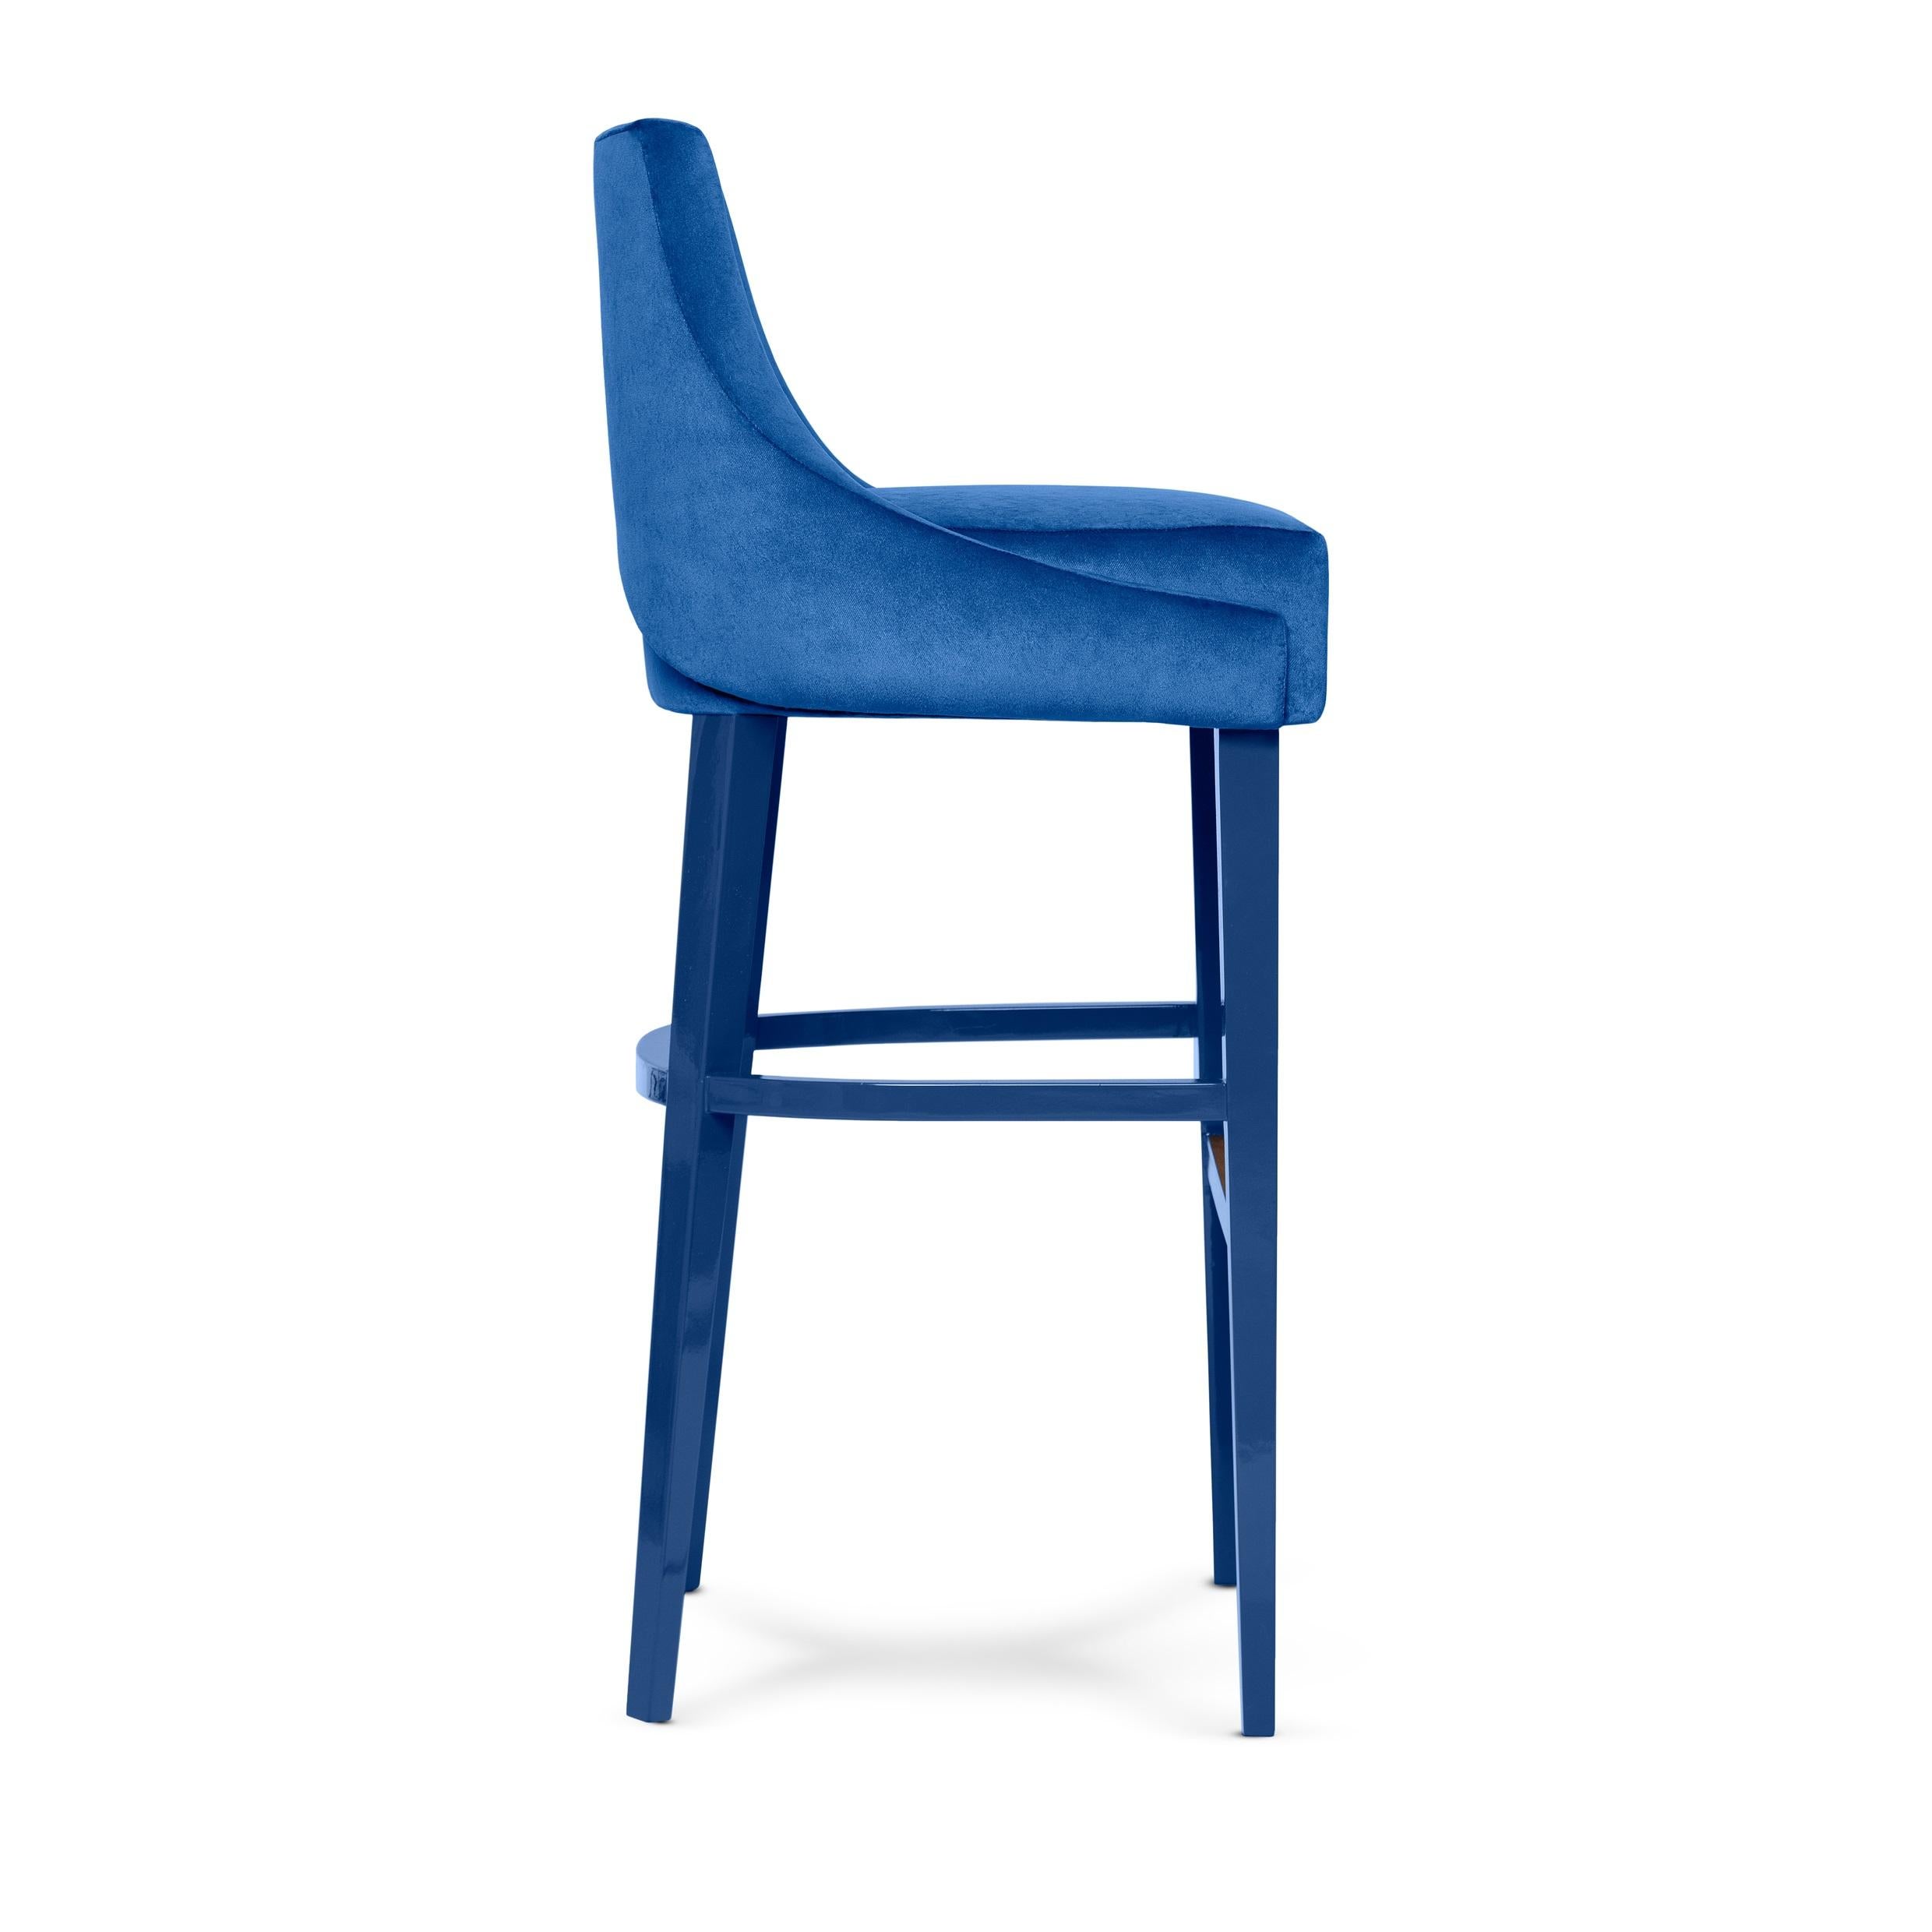 Portuguese Contemporary Barstool w/ Seaming Details For Sale